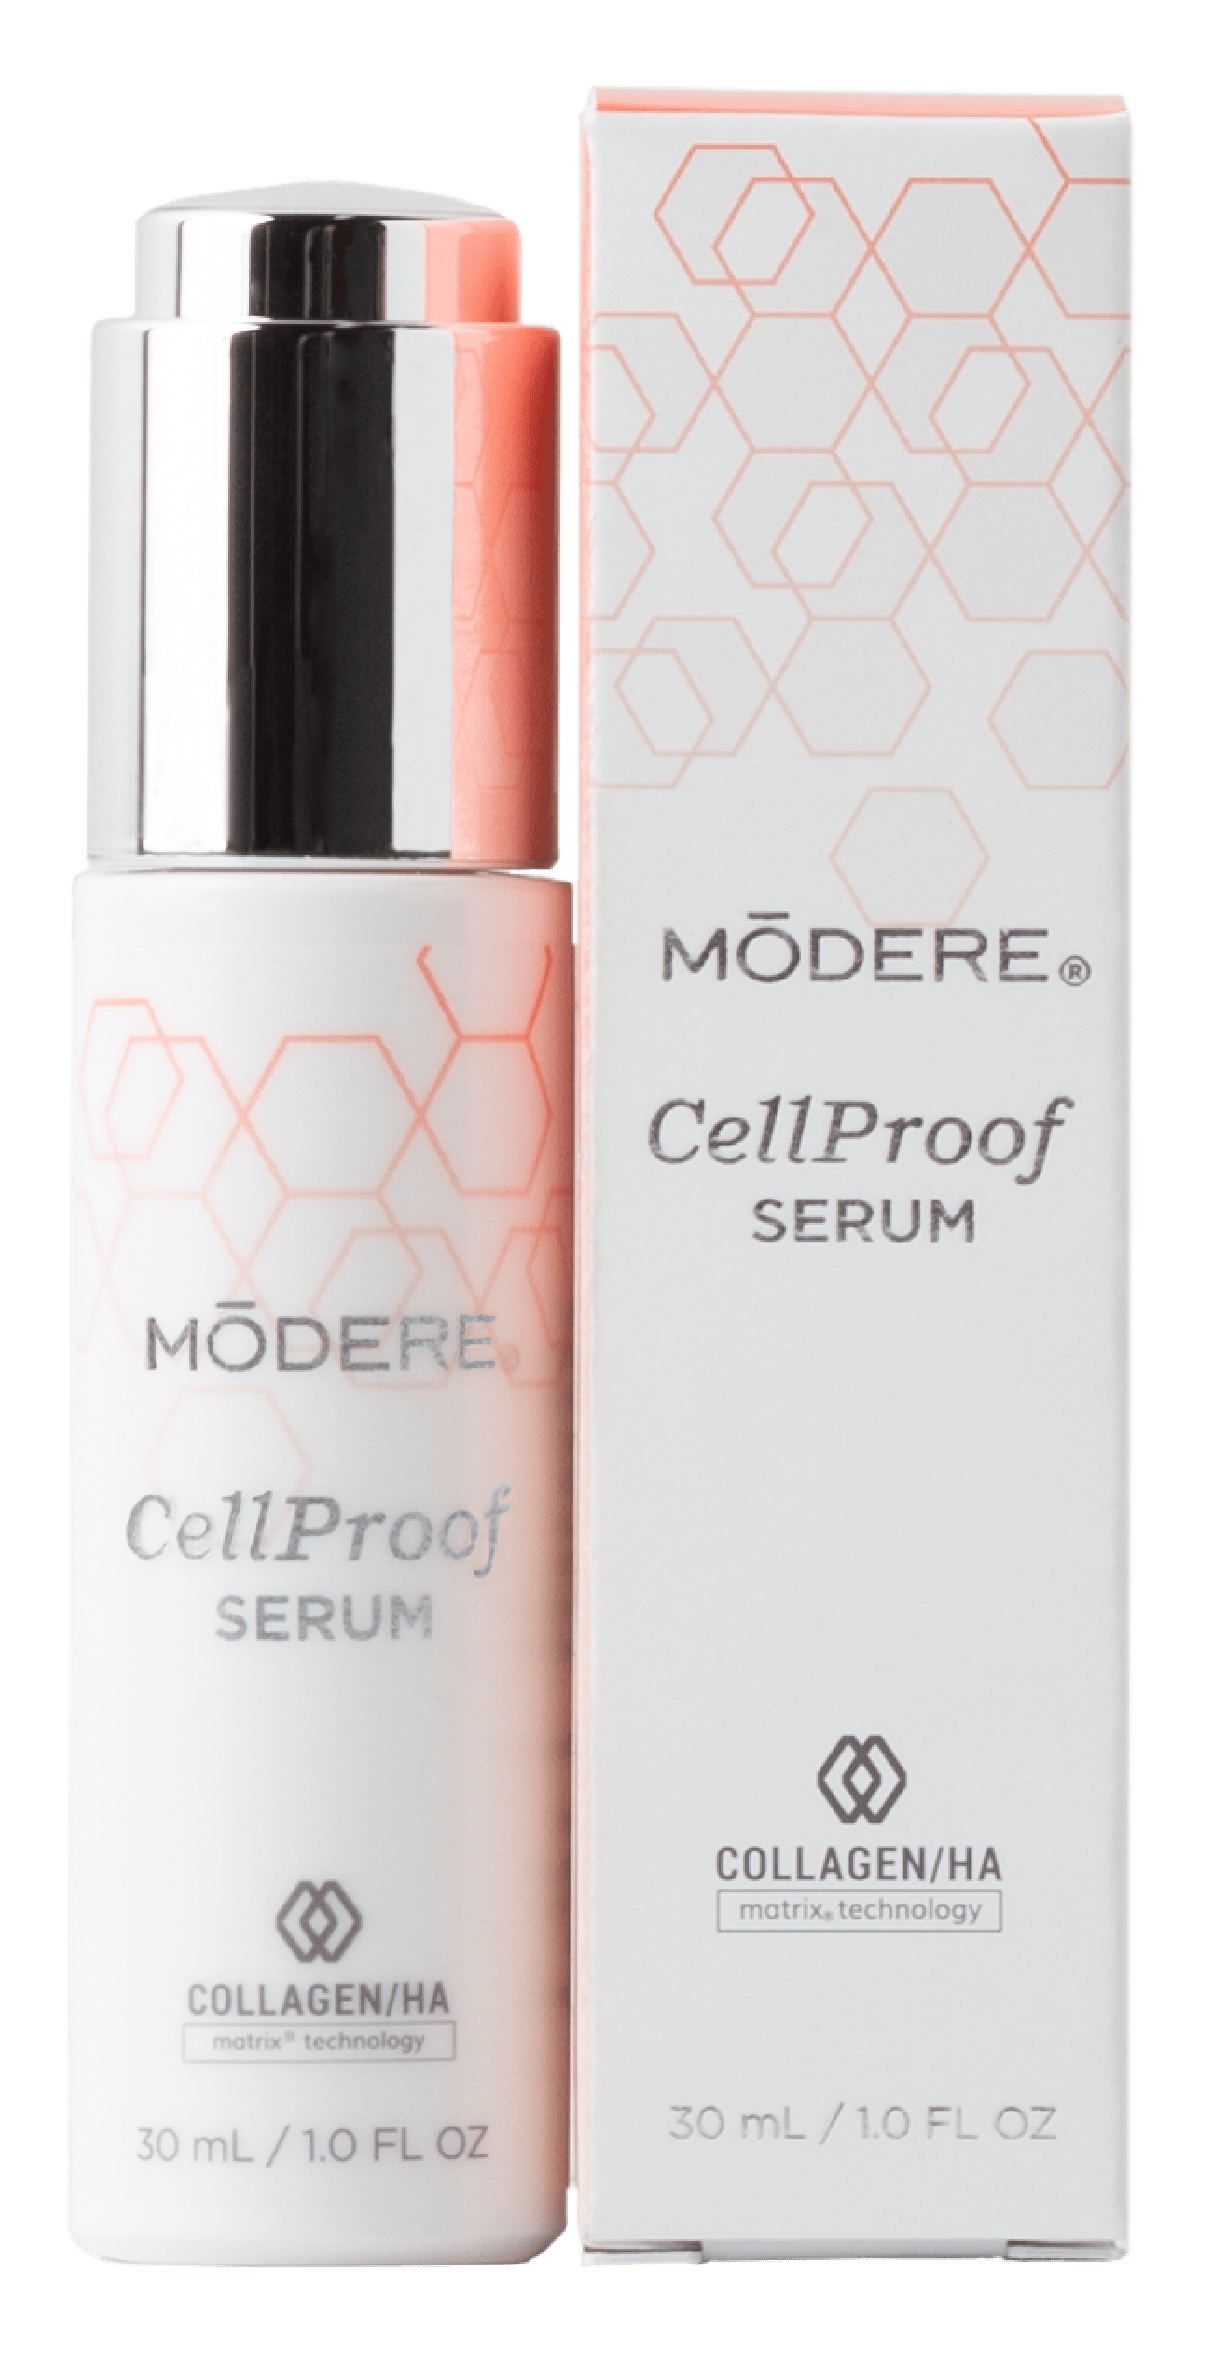 Modere Cellproof Serum